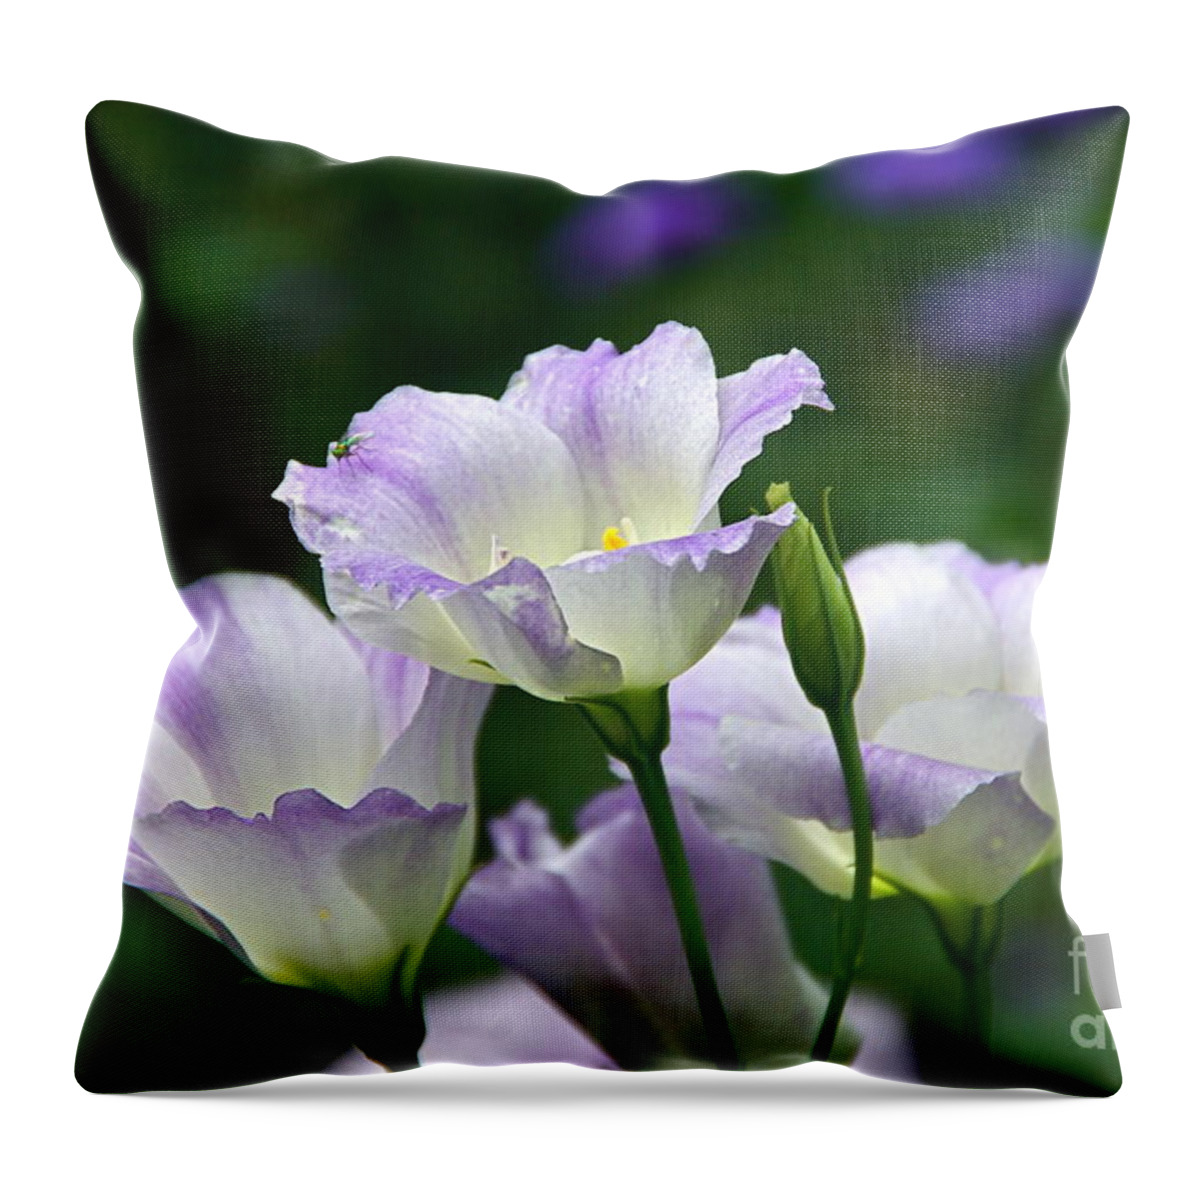 Lisianthus And Turquoise Hoverfly Throw Pillow featuring the photograph Texas Bluebell And Turquoise Visitor by Byron Varvarigos